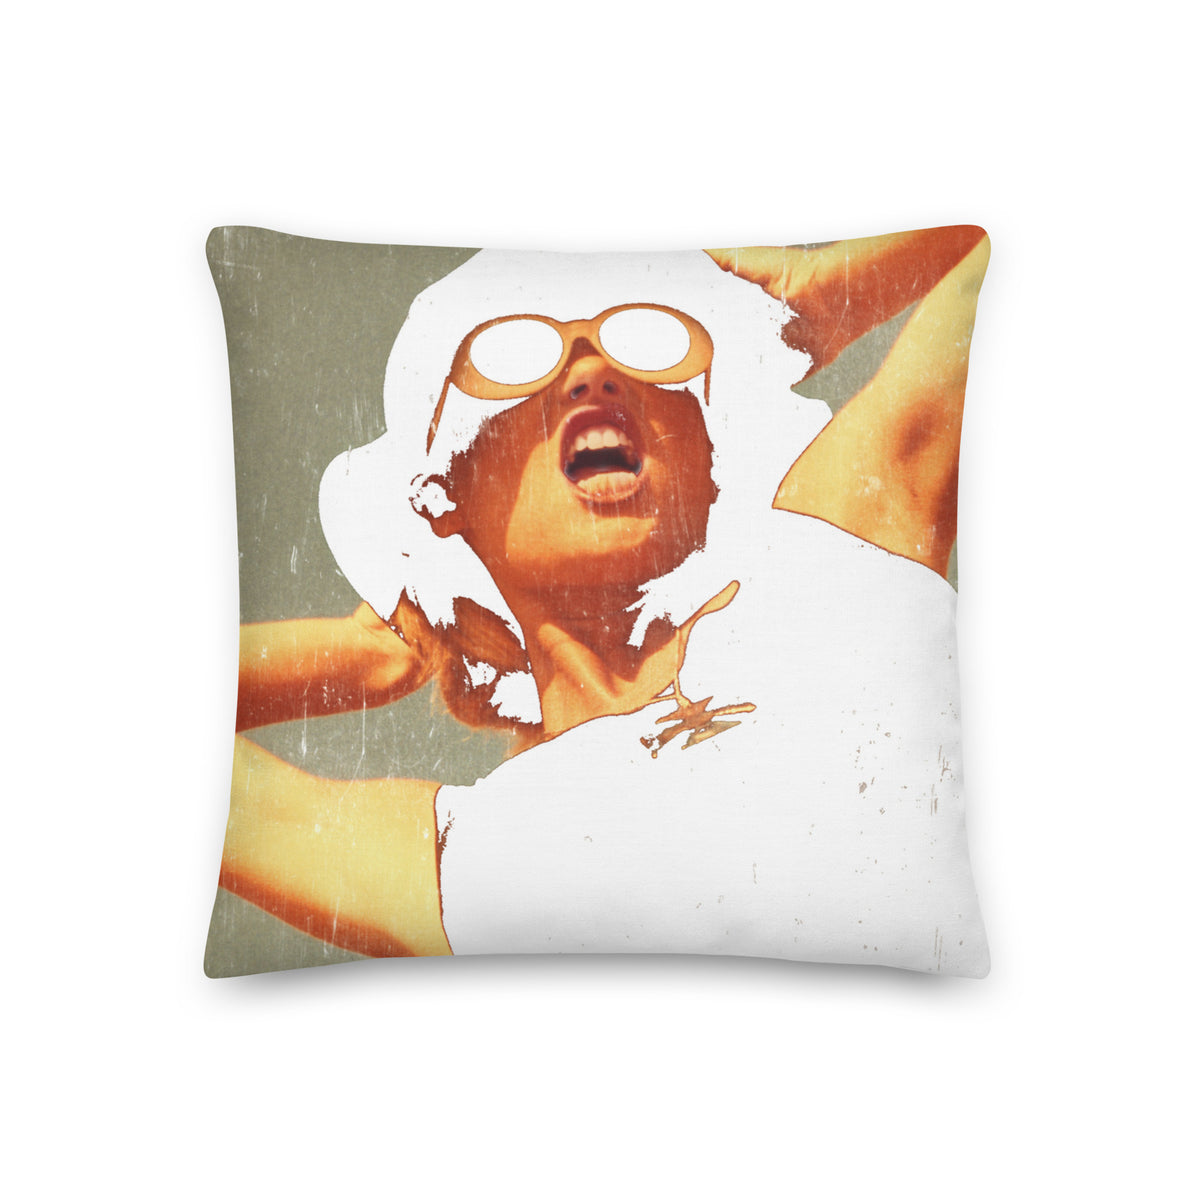 Premium pillow with the image of a fashion model artistically rendered front view